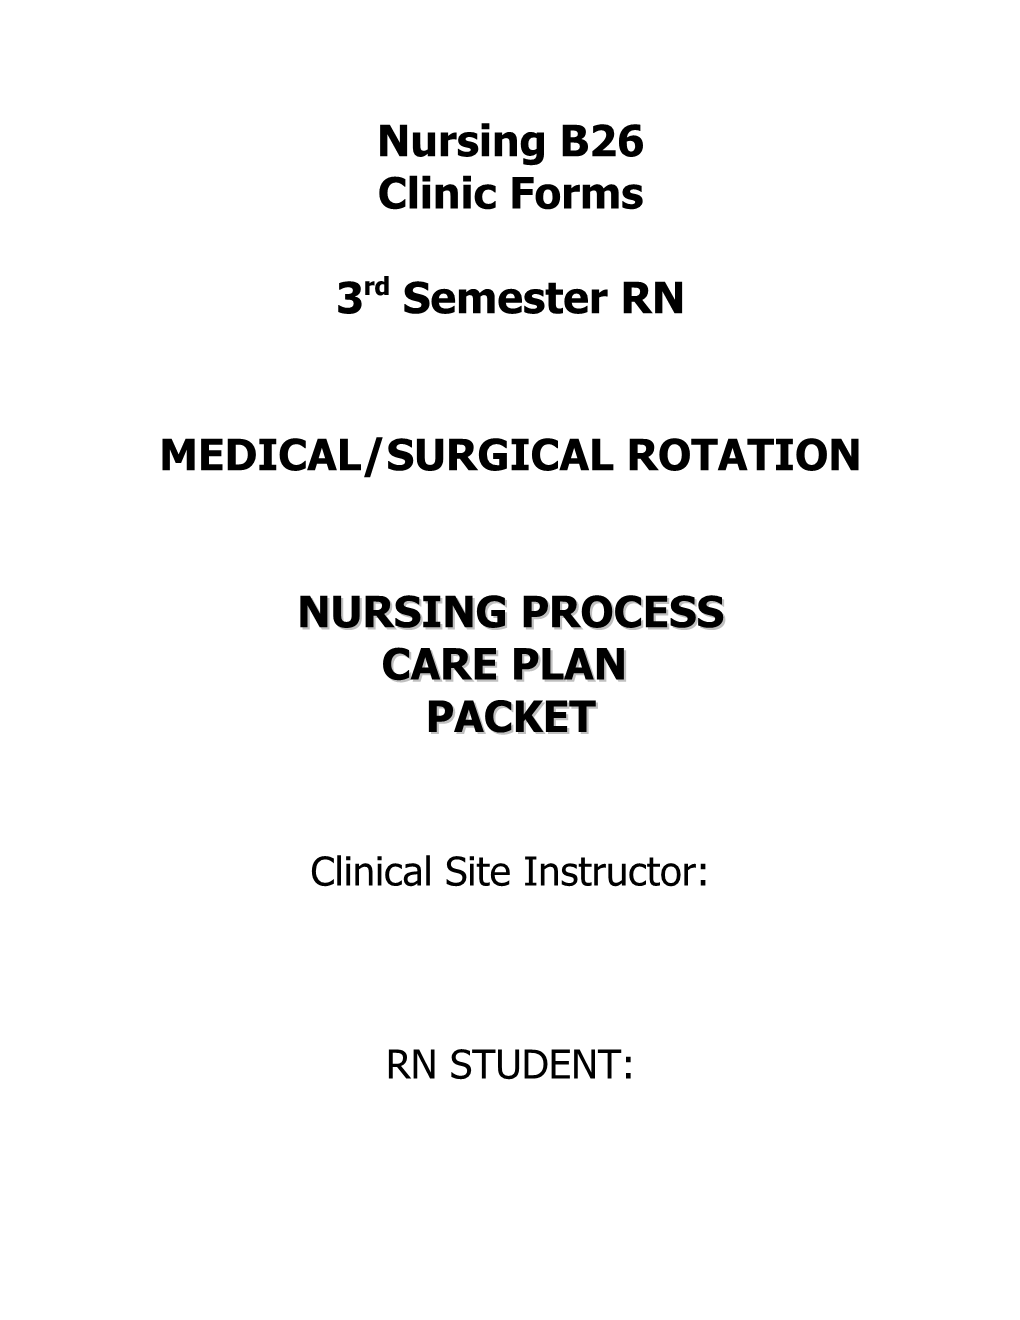 Medical/Surgical Rotation